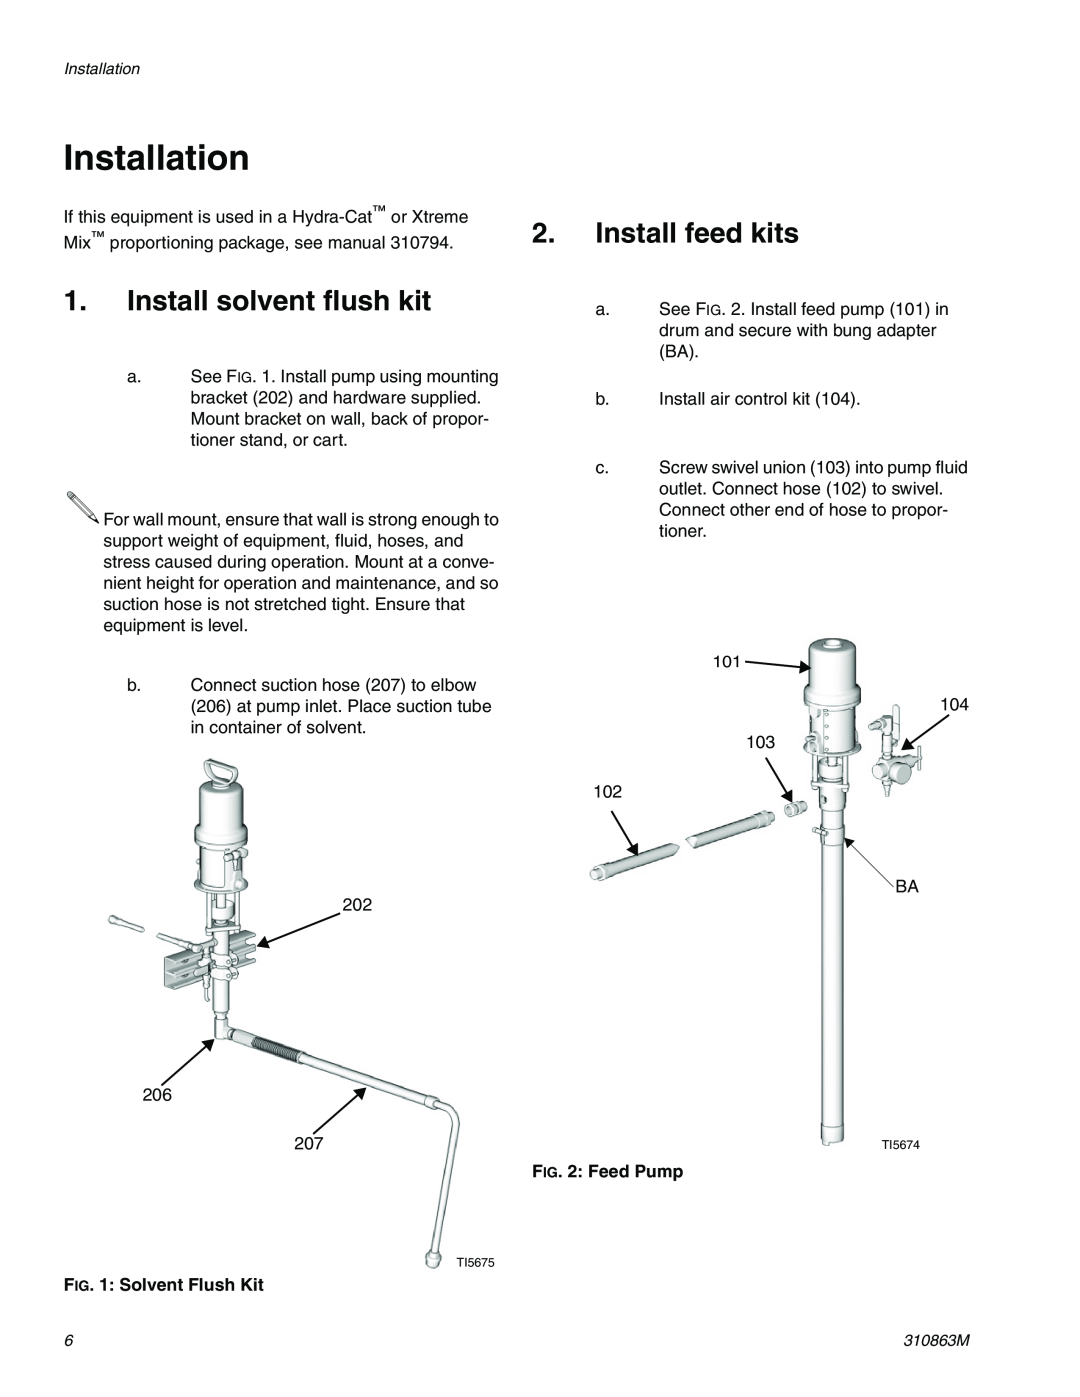 Graco 310863M important safety instructions Installation, Install solvent flush kit, Install feed kits 